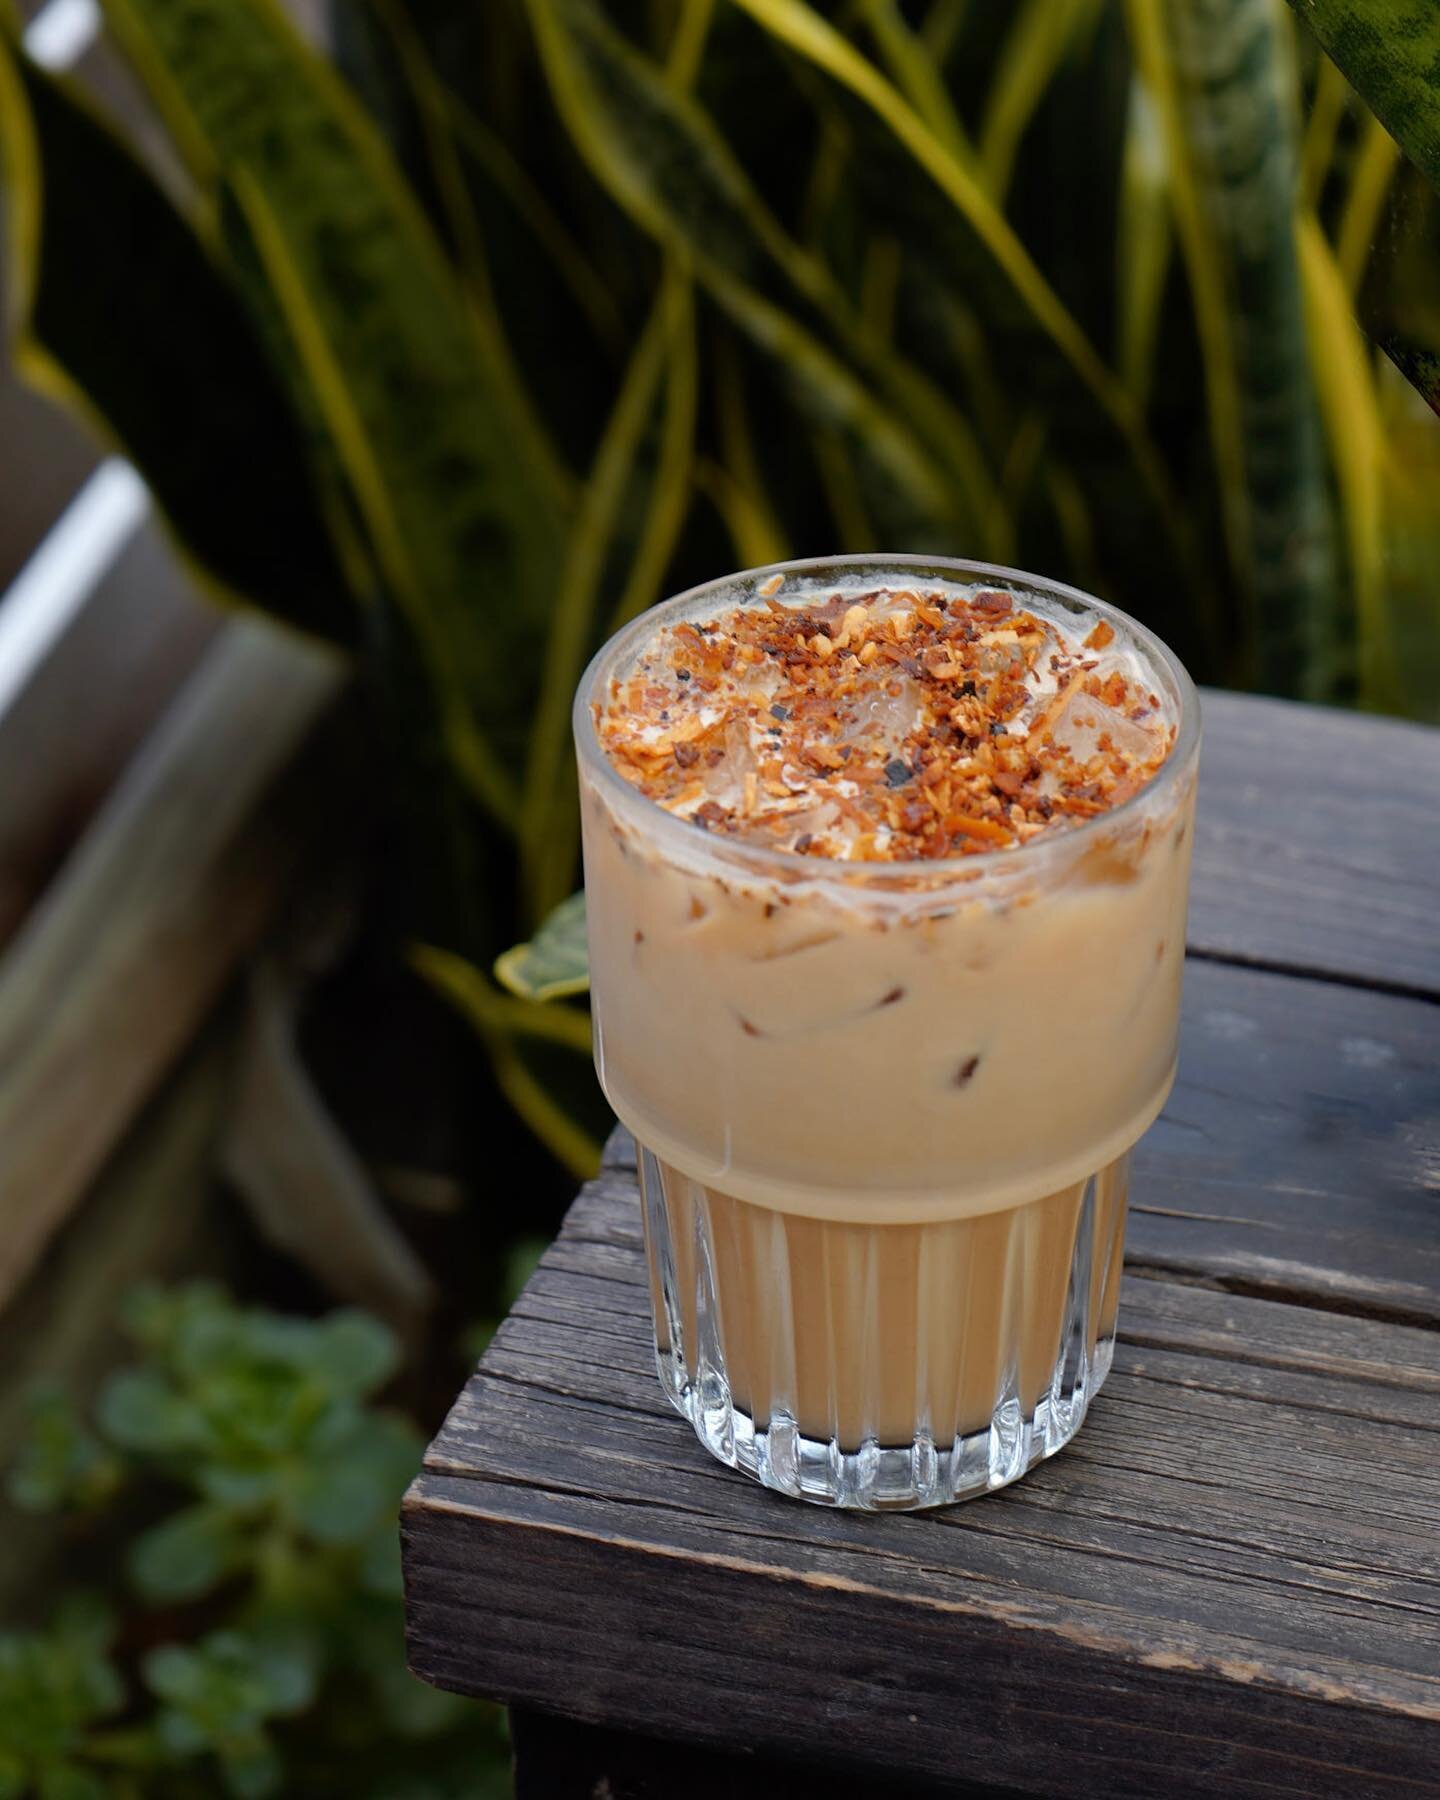 Pretty Nutty Latte: all the tropical vibes combined. Catch this housemade syrup in your lattes all summer long! 🌴

It is best iced and best with oat milk. 

PS. You can ask to hold the toasted coconut-macadamia toppings if that&rsquo;s not your thin